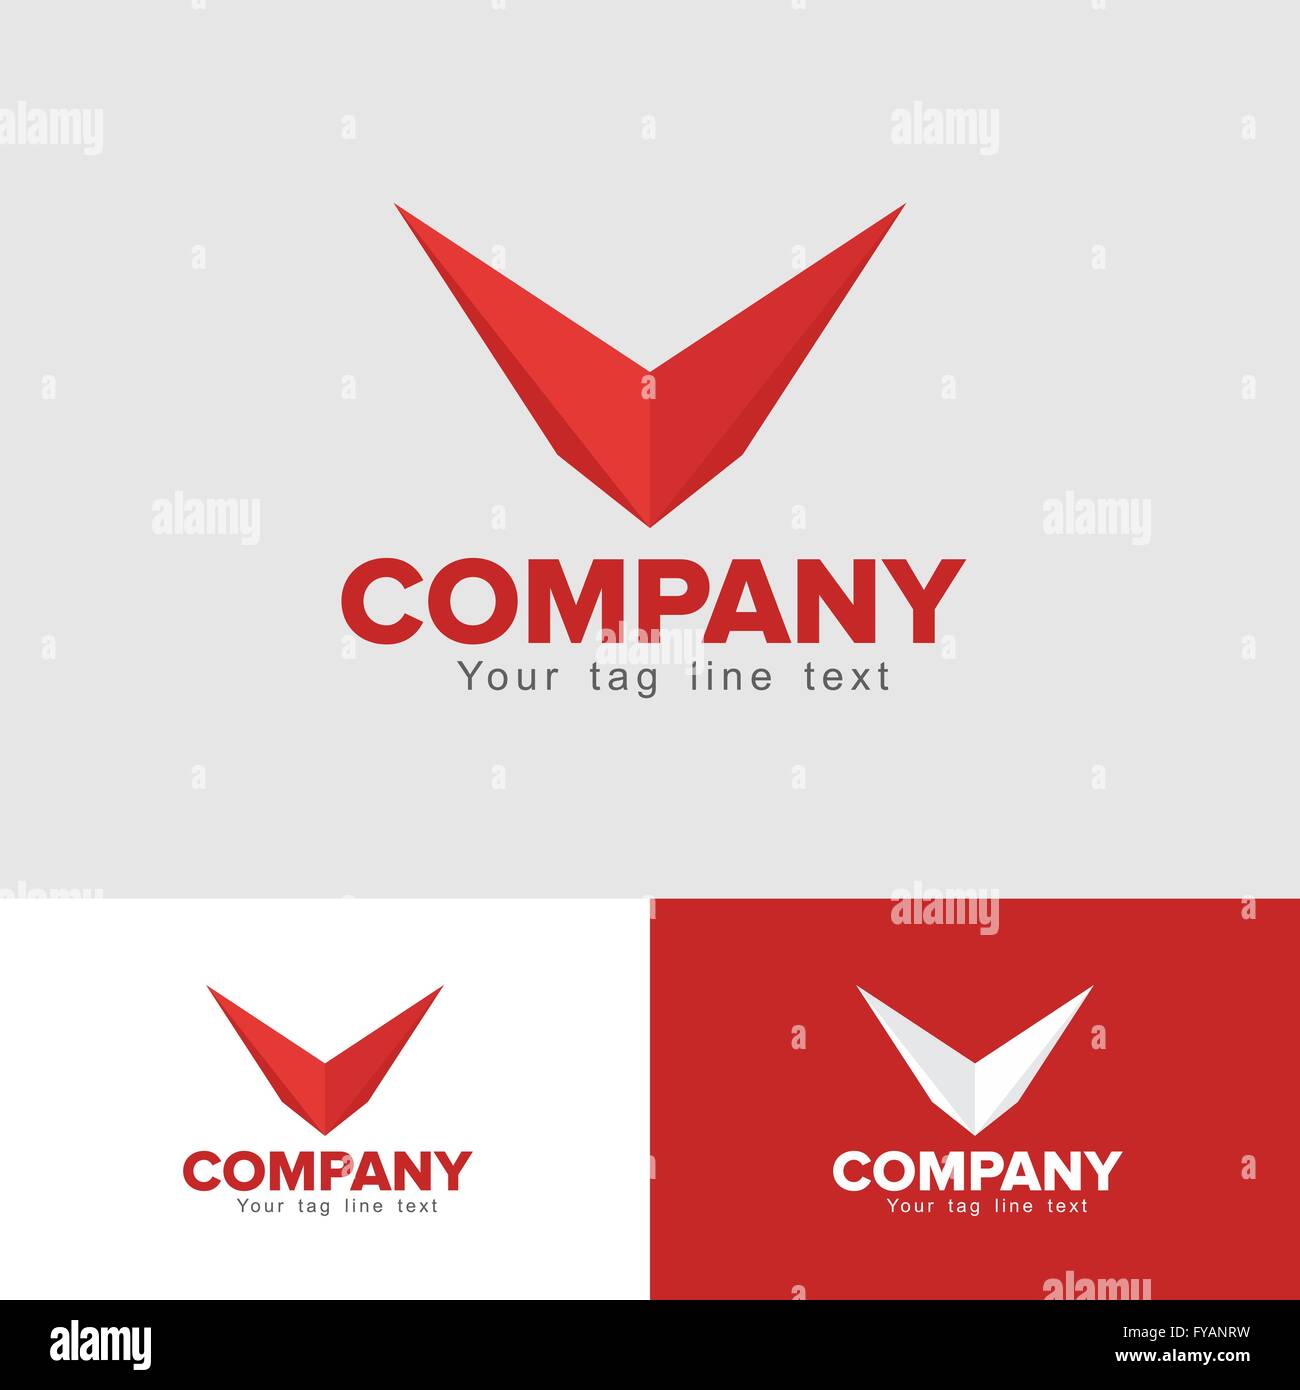 Creative Corporate Logo Design Template Professional Business Card And Letterhead Design Layout Fully Editable Vector Graphics Stock Vector Image Art Alamy